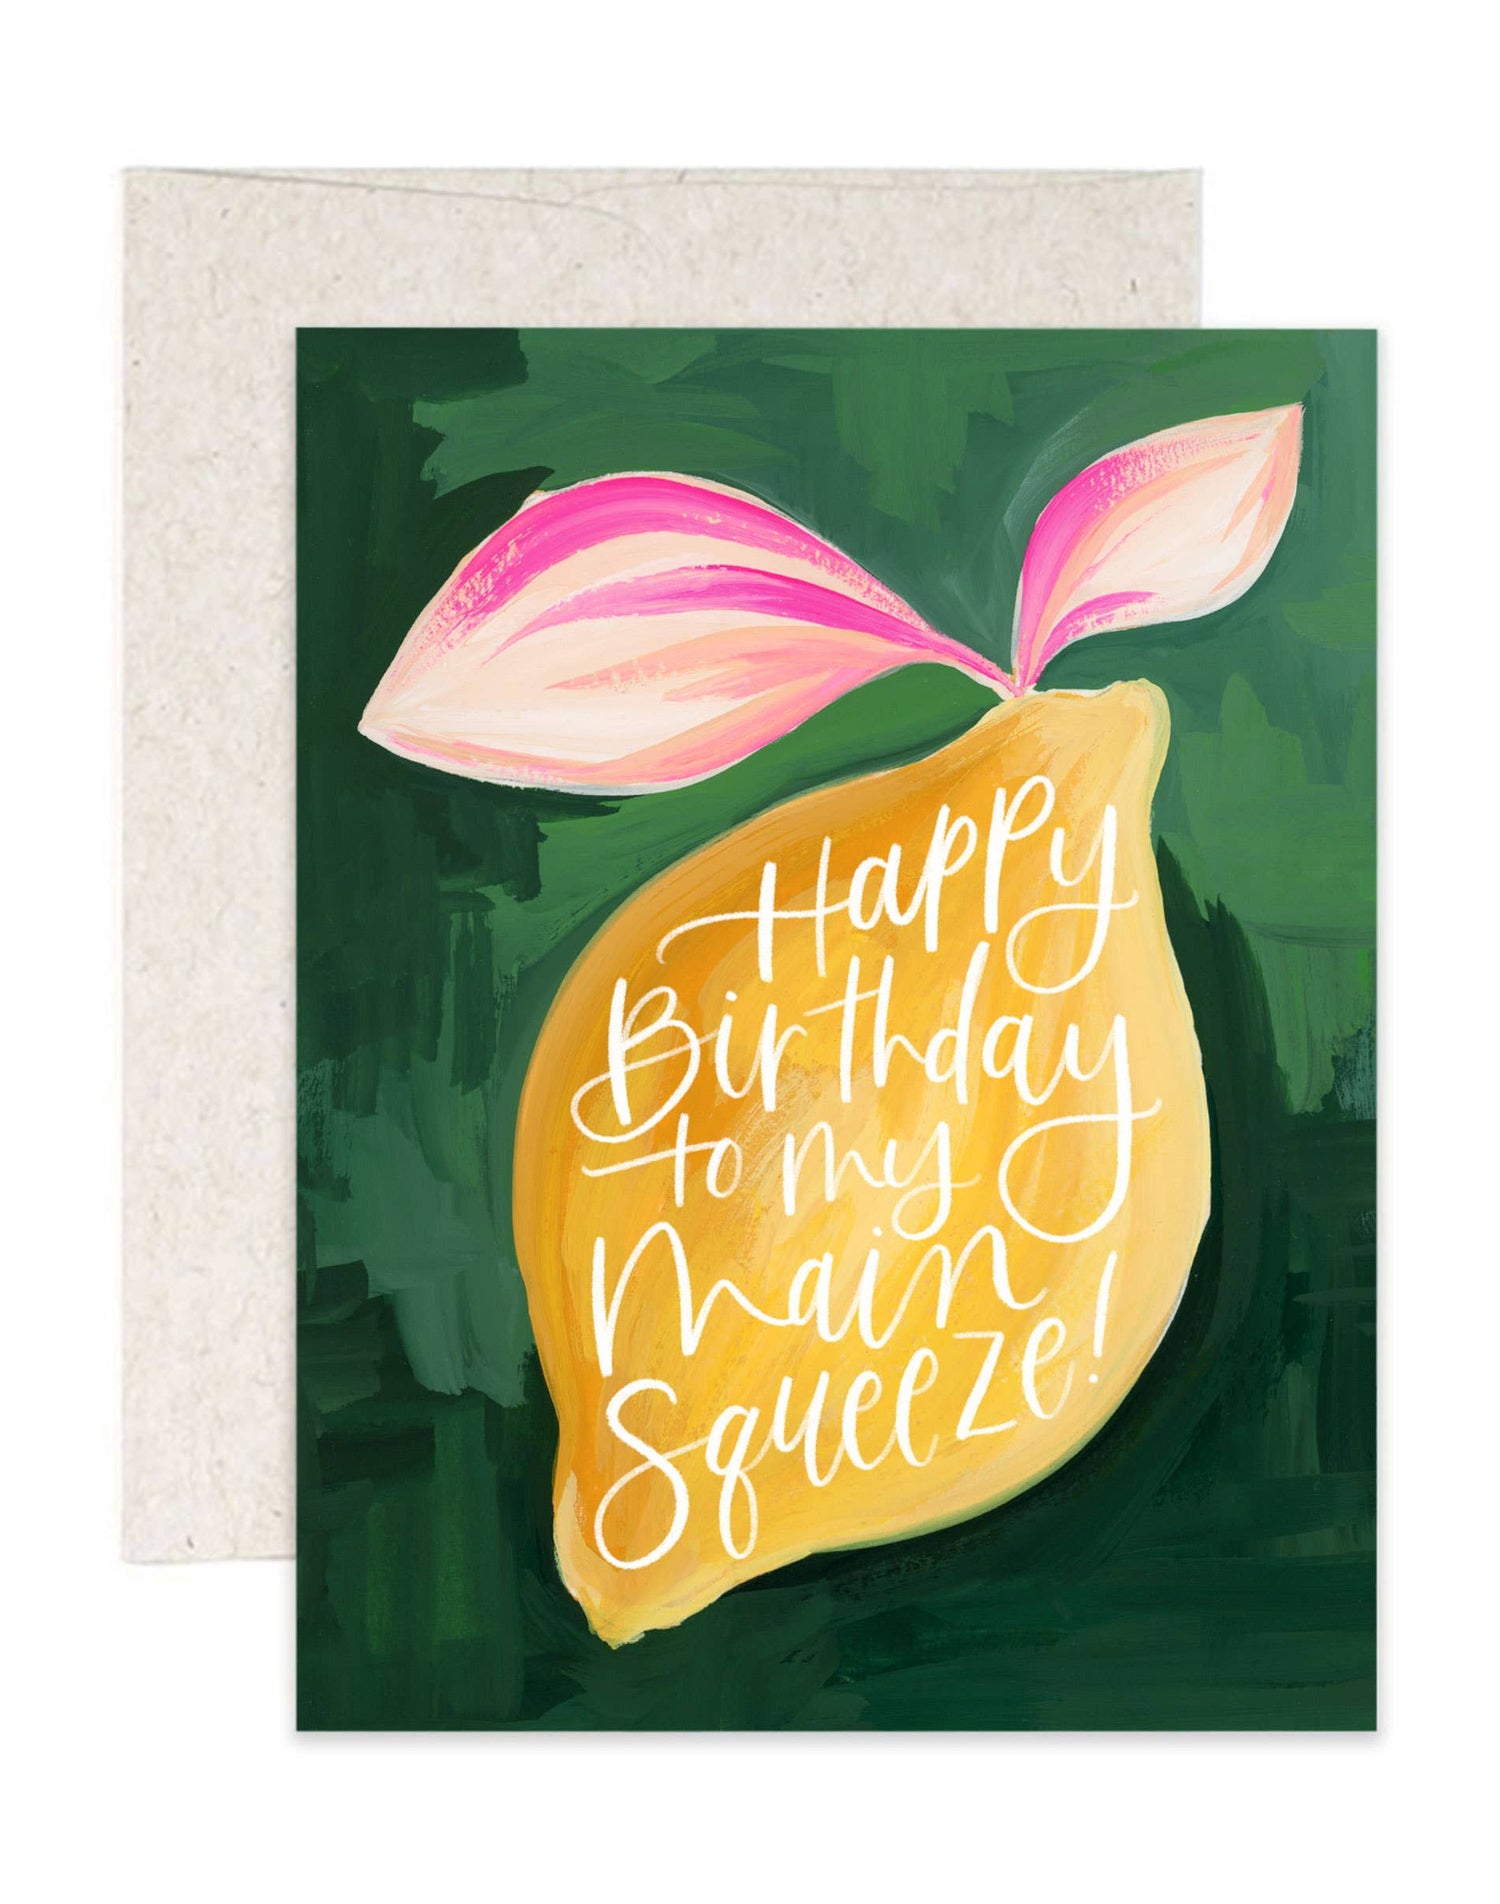 Main Squeeze Birthday Greeting Card